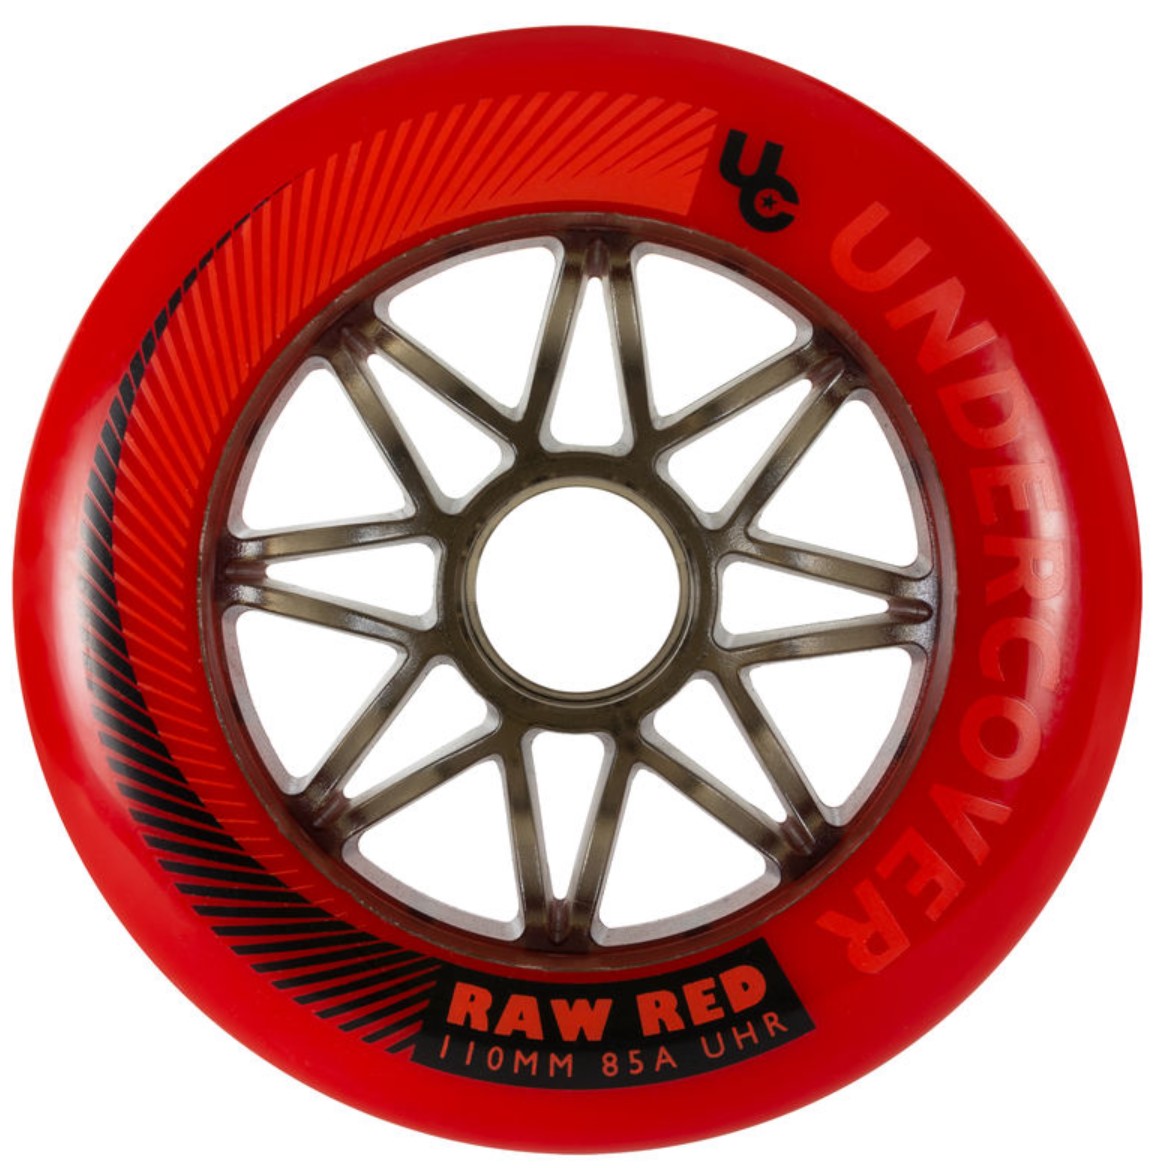 UnderCover Raw Red inline skate wheel of 110 mm diameter and 85A durometer for speed slalom